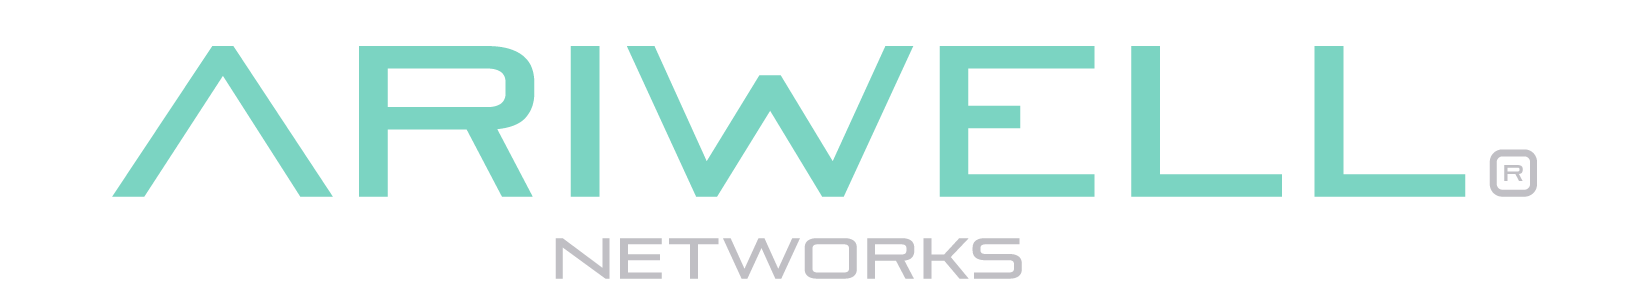 Ariwell Networks